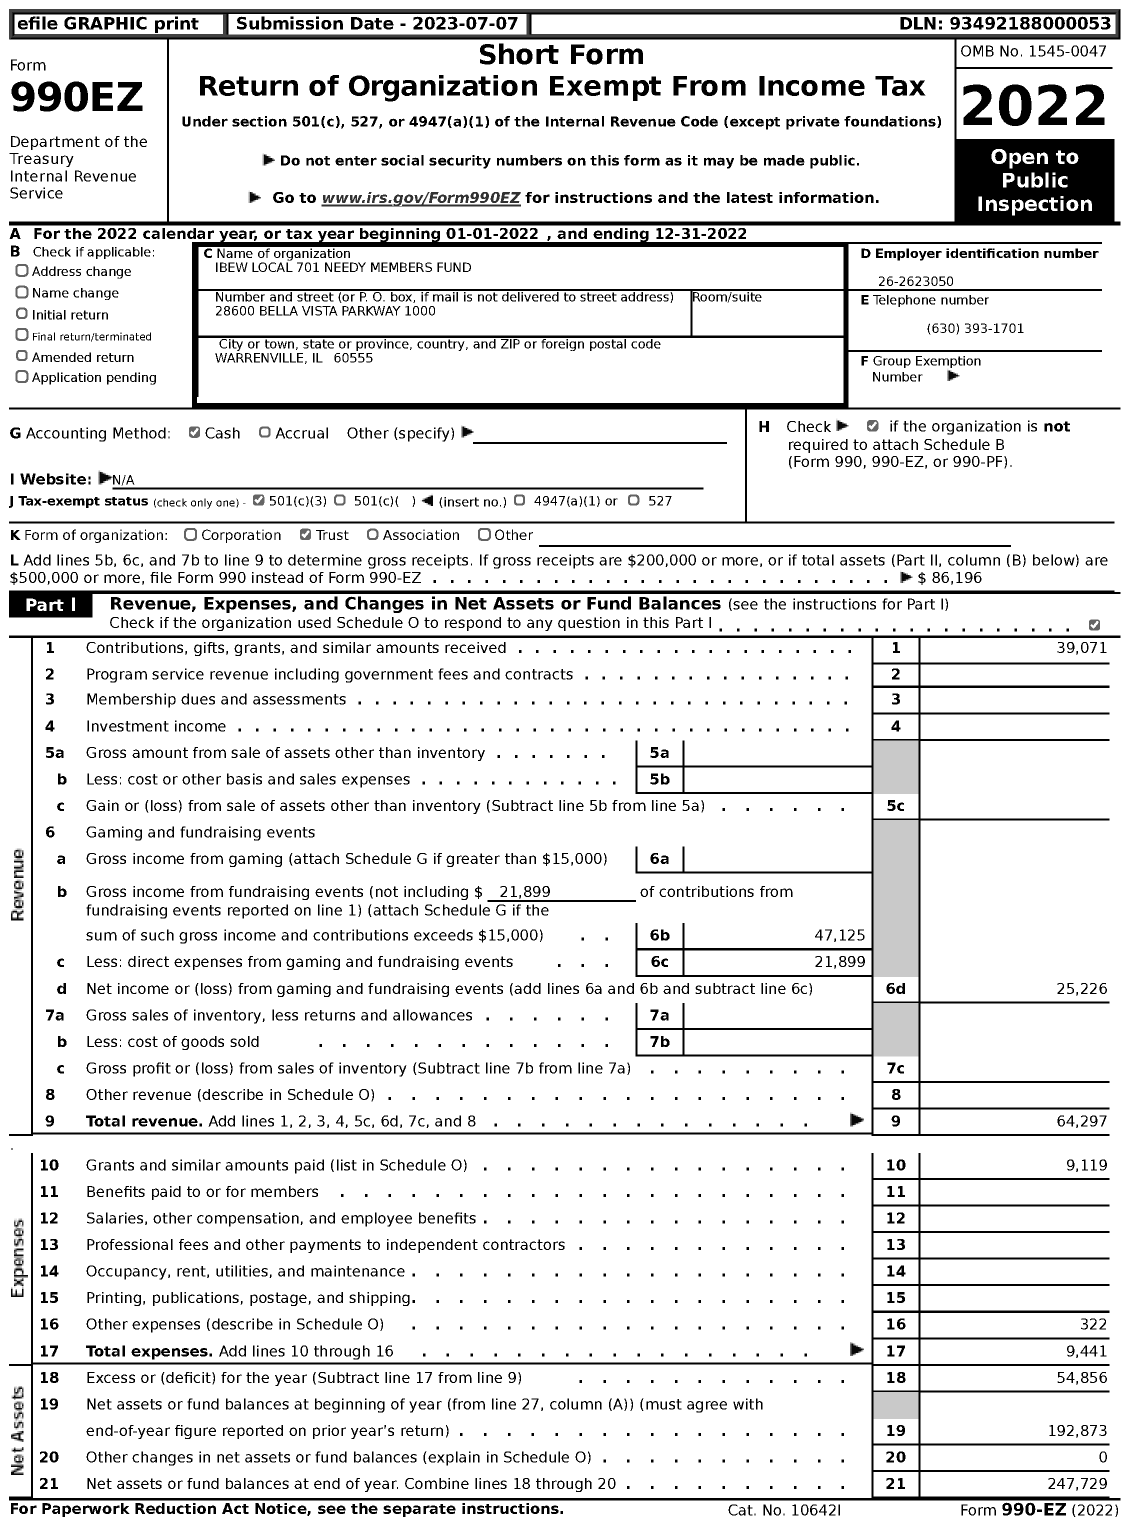 Image of first page of 2022 Form 990EZ for IBEW Local 701 Needy Members Fund